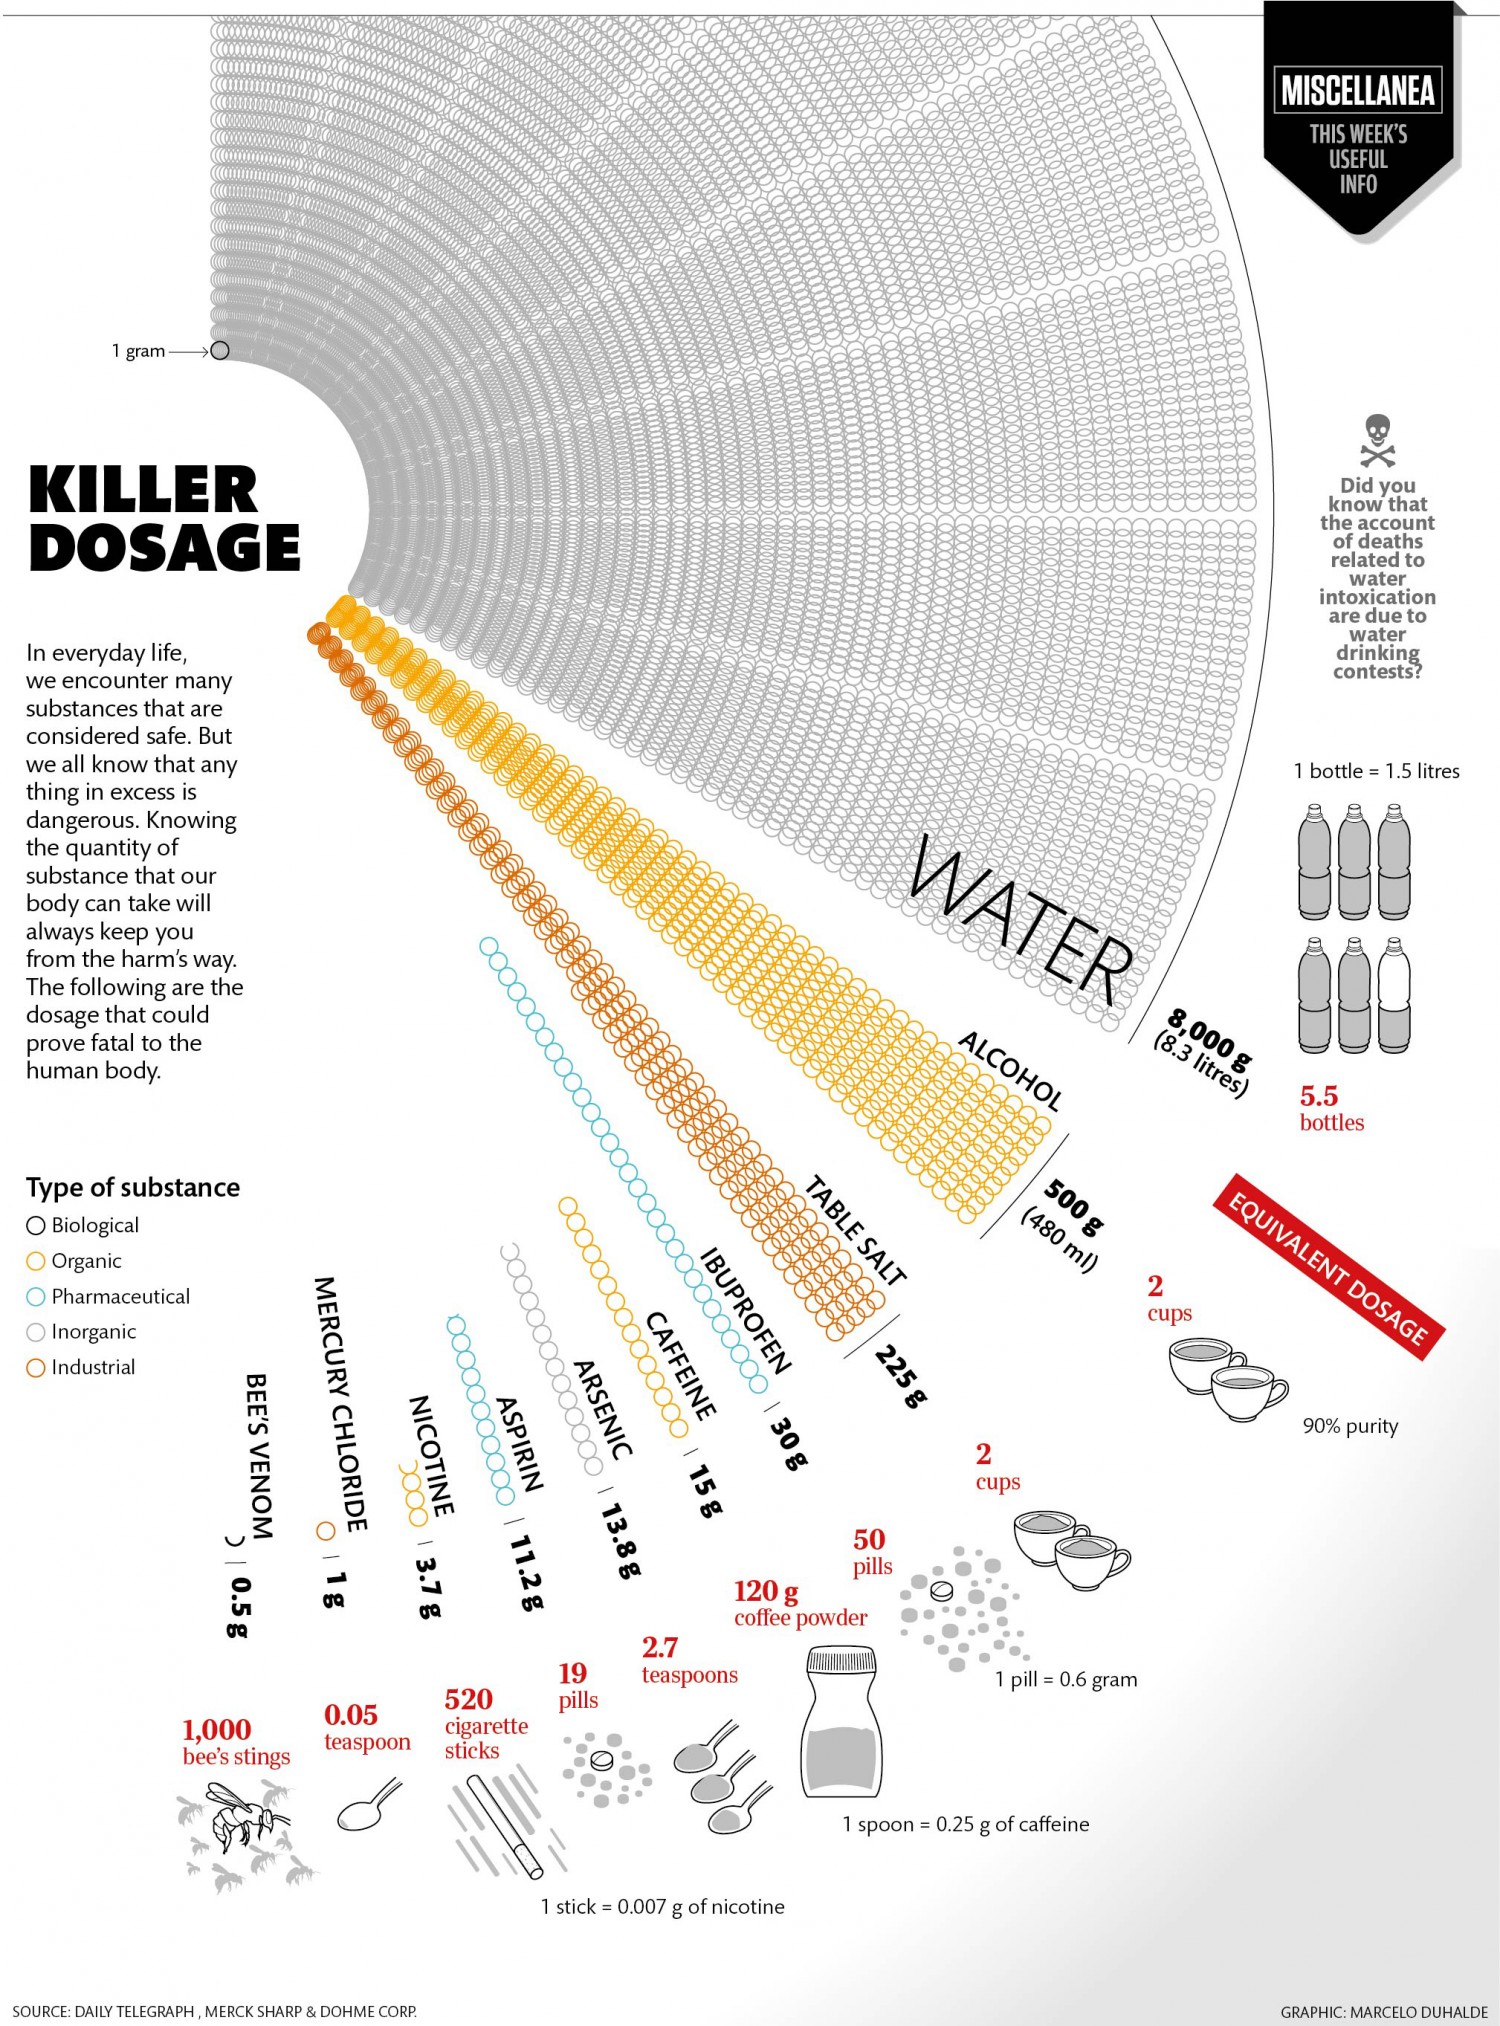 The dosages of everyday substances that are proven to be lethal to the human body infographic